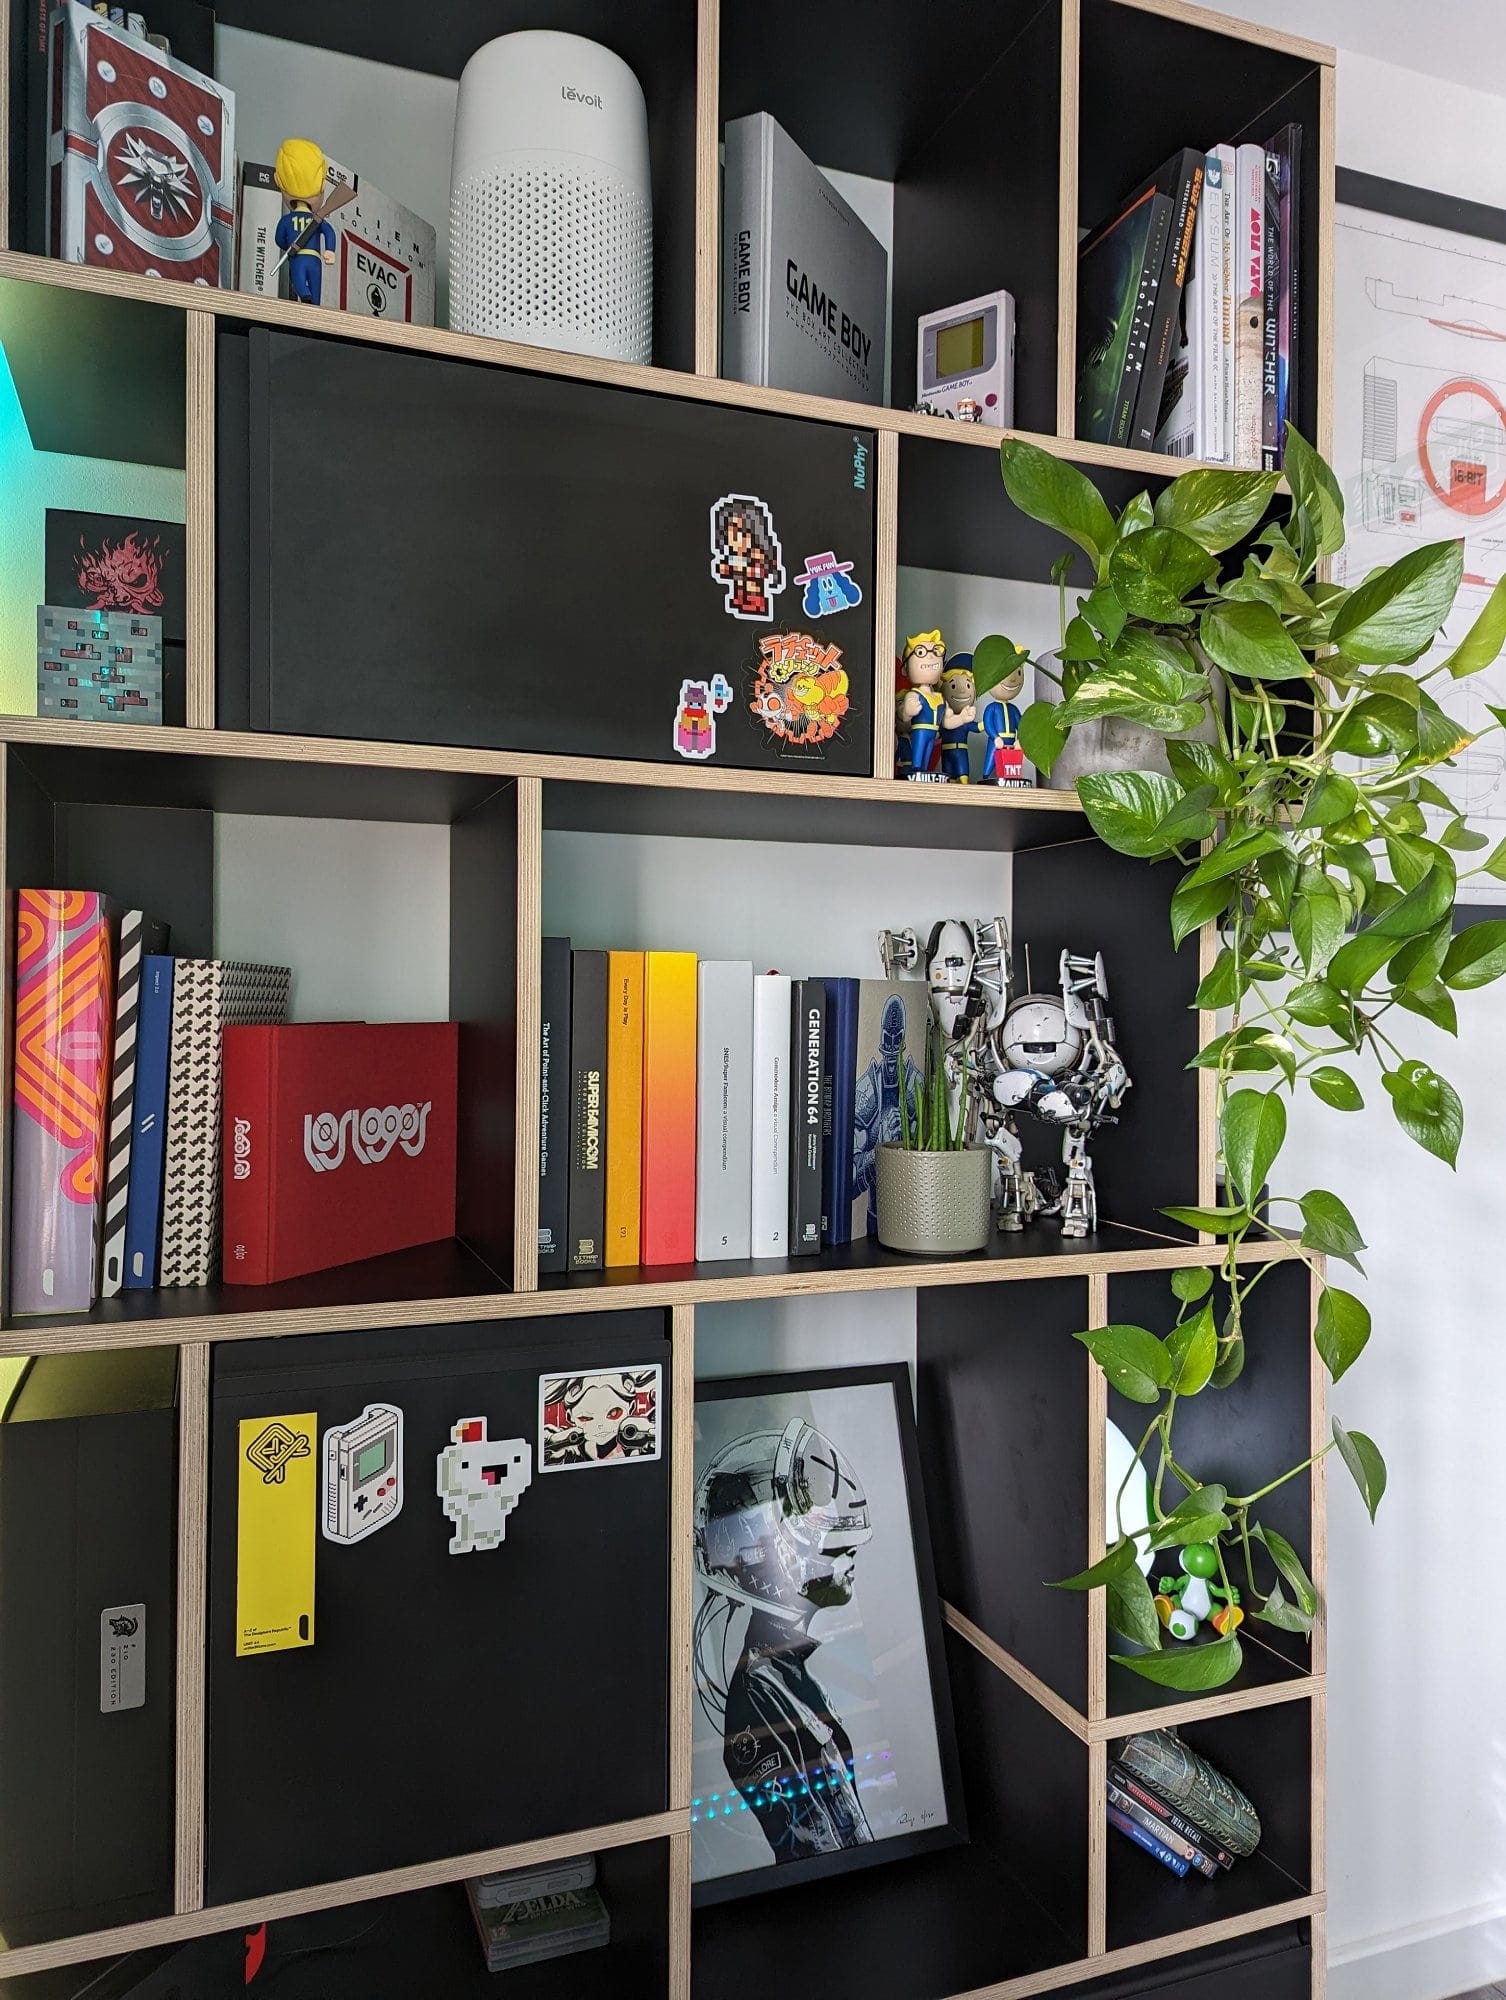 A bookshelf filled with books, tech gadgets, collectibles, and potted plants, featuring a mix of retro and modern items, decorated with stickers and framed artwork, and accentuated by a hanging plant